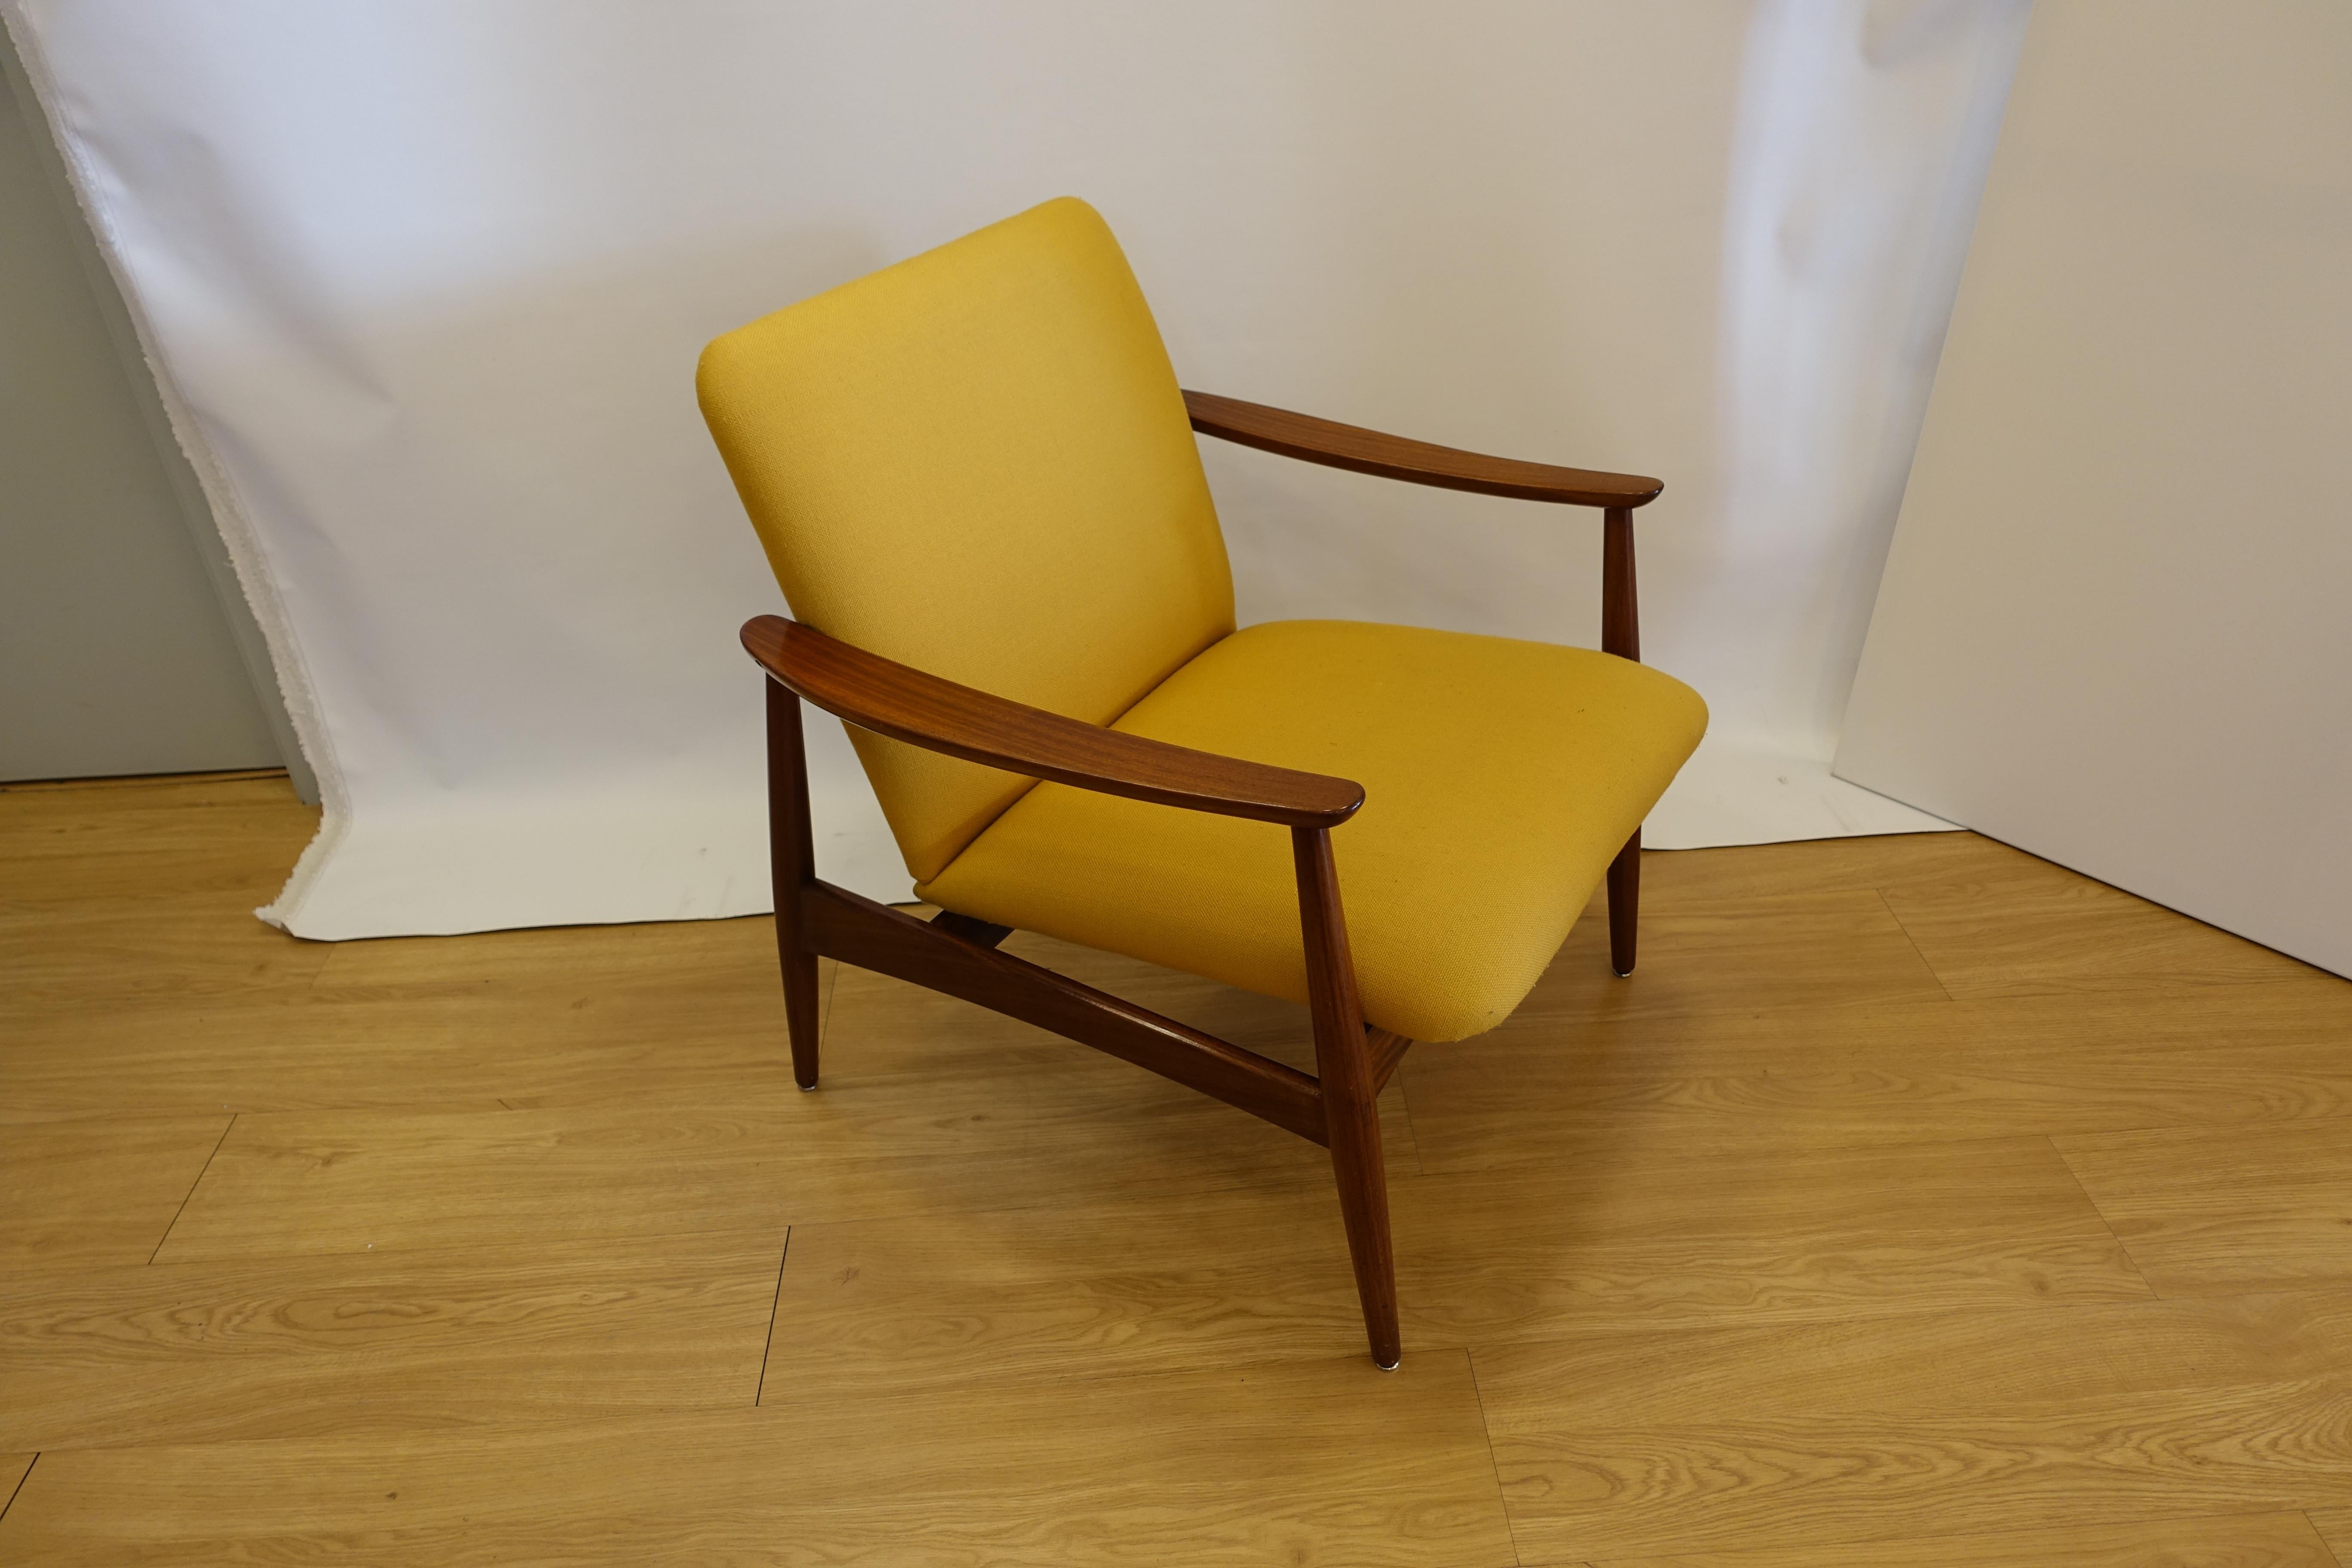 Olaio 67 was the first collapsible armchair produced by Móveis Olaio. Keeping the functional, would come to culminate, in 1967, with presentation of 